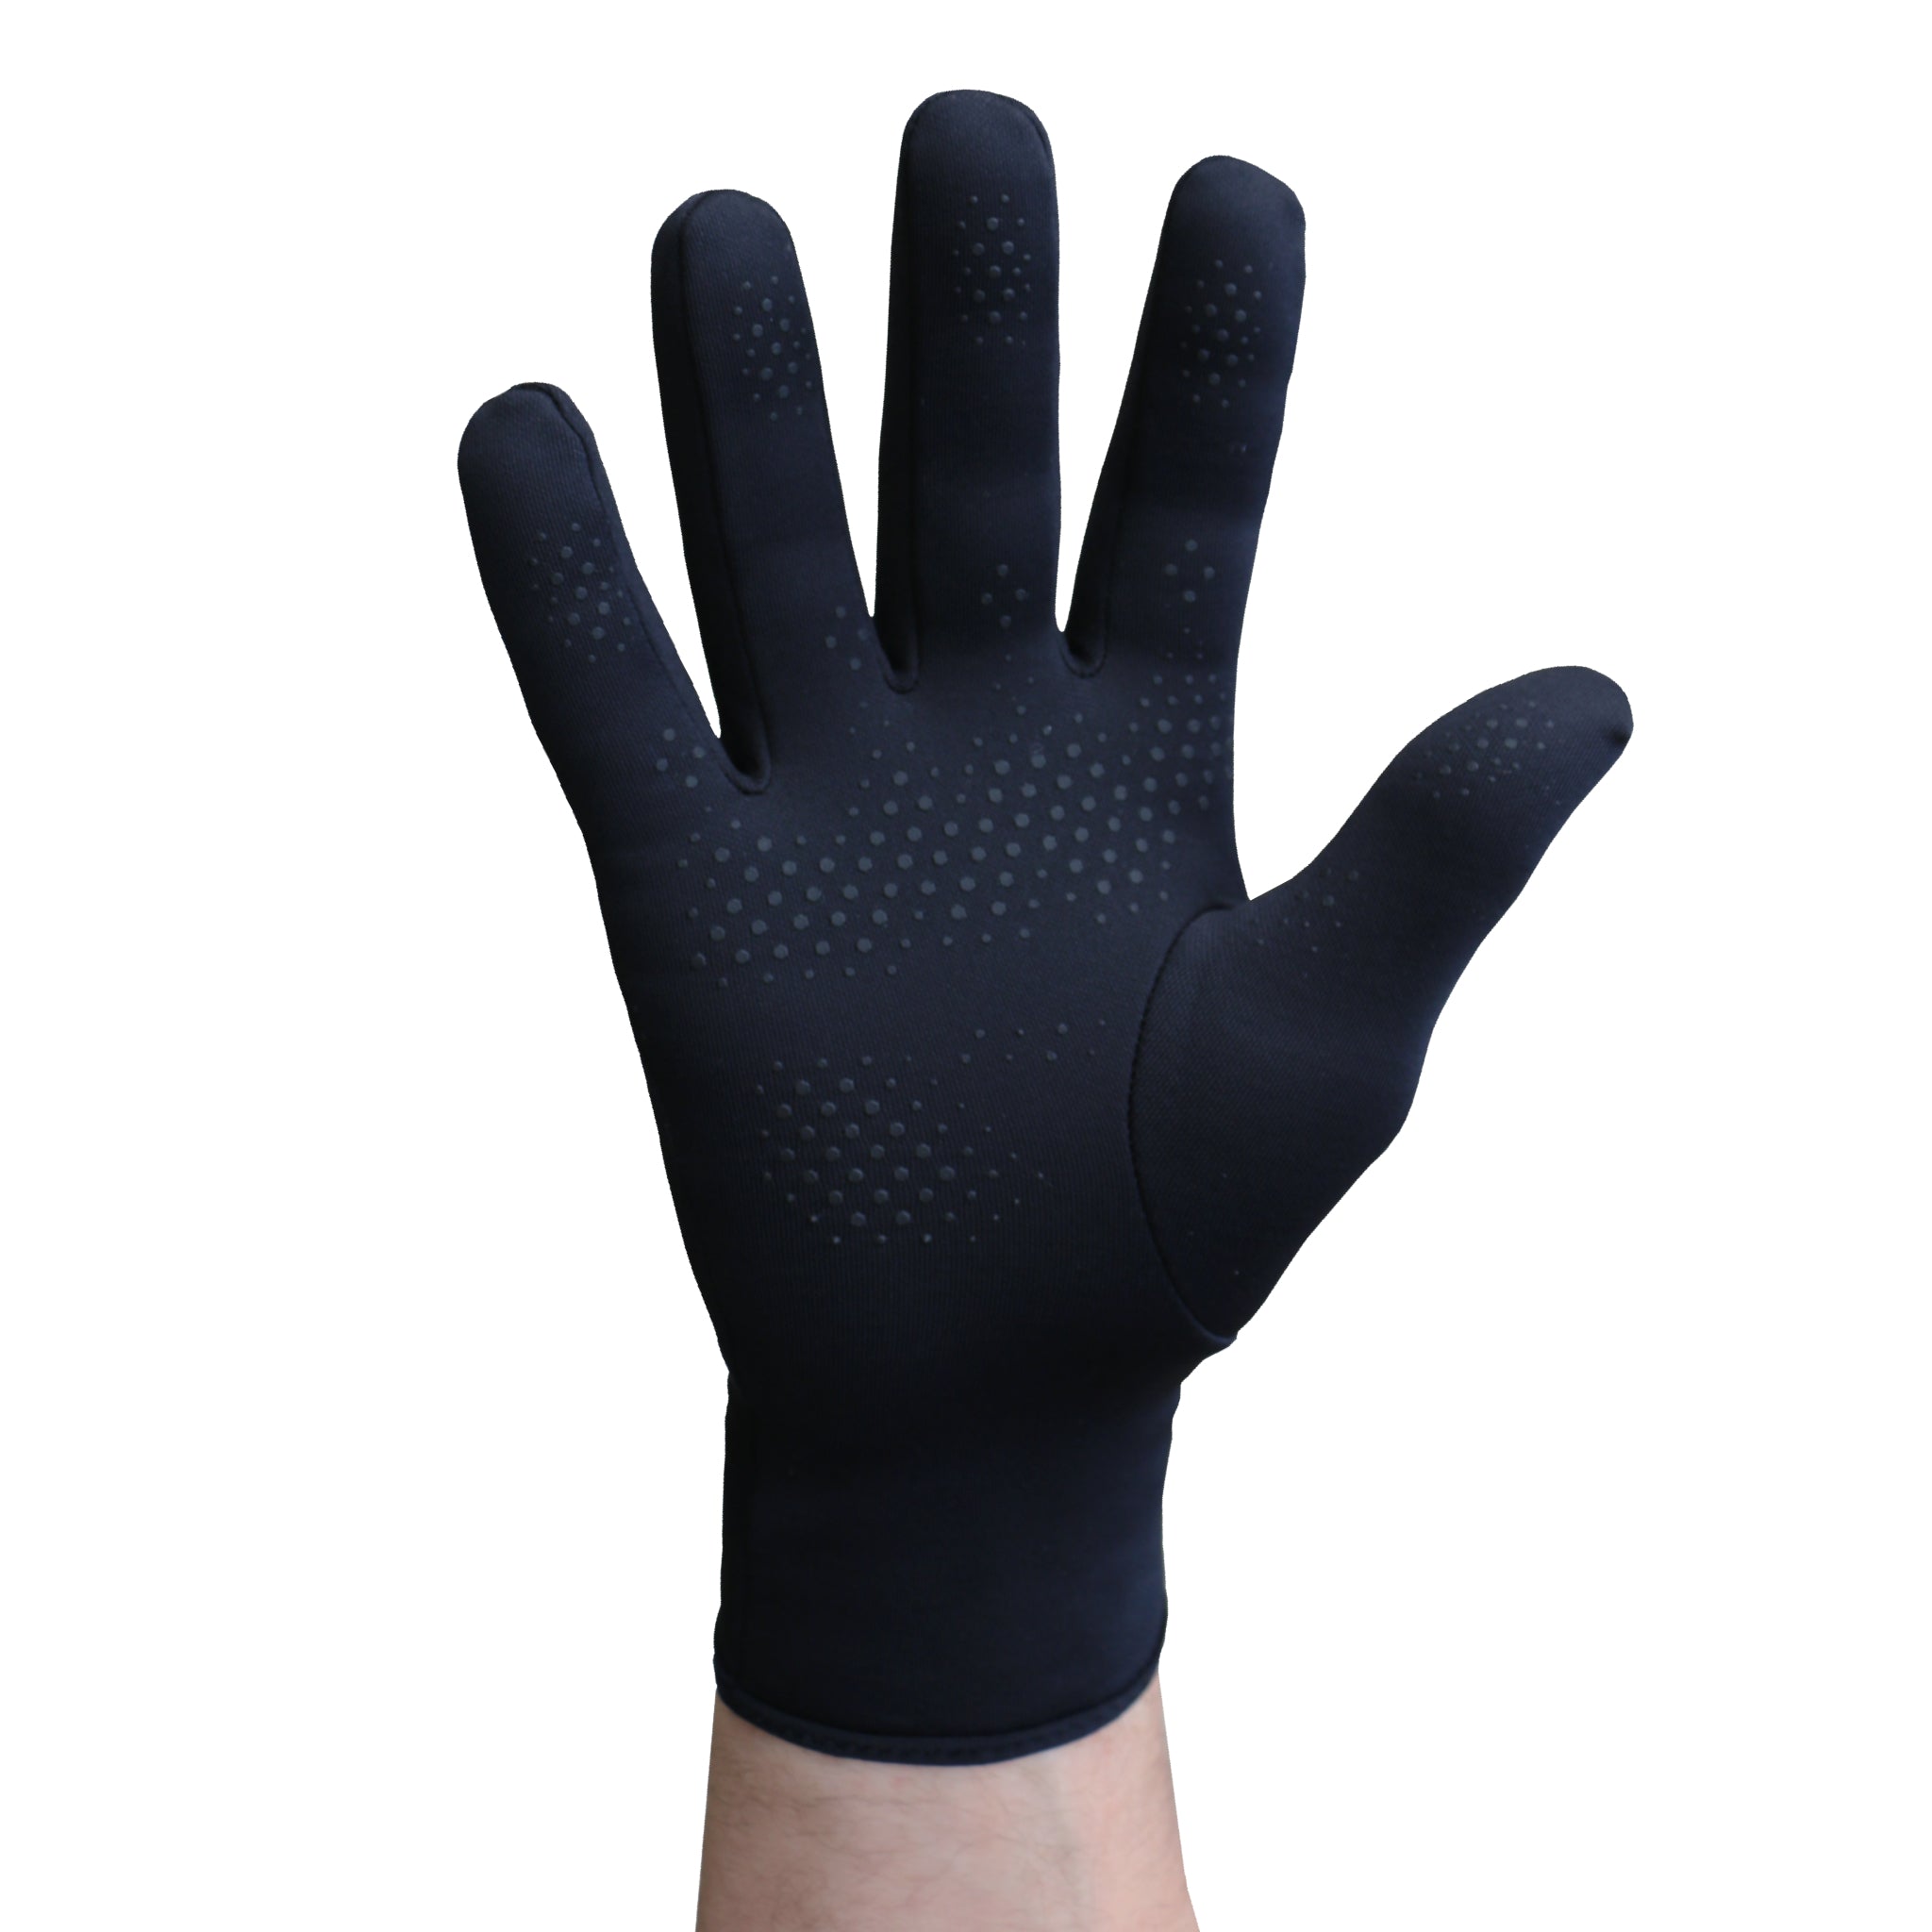 Infrared Fleece Gloves Keep Hands at Right Temperature 